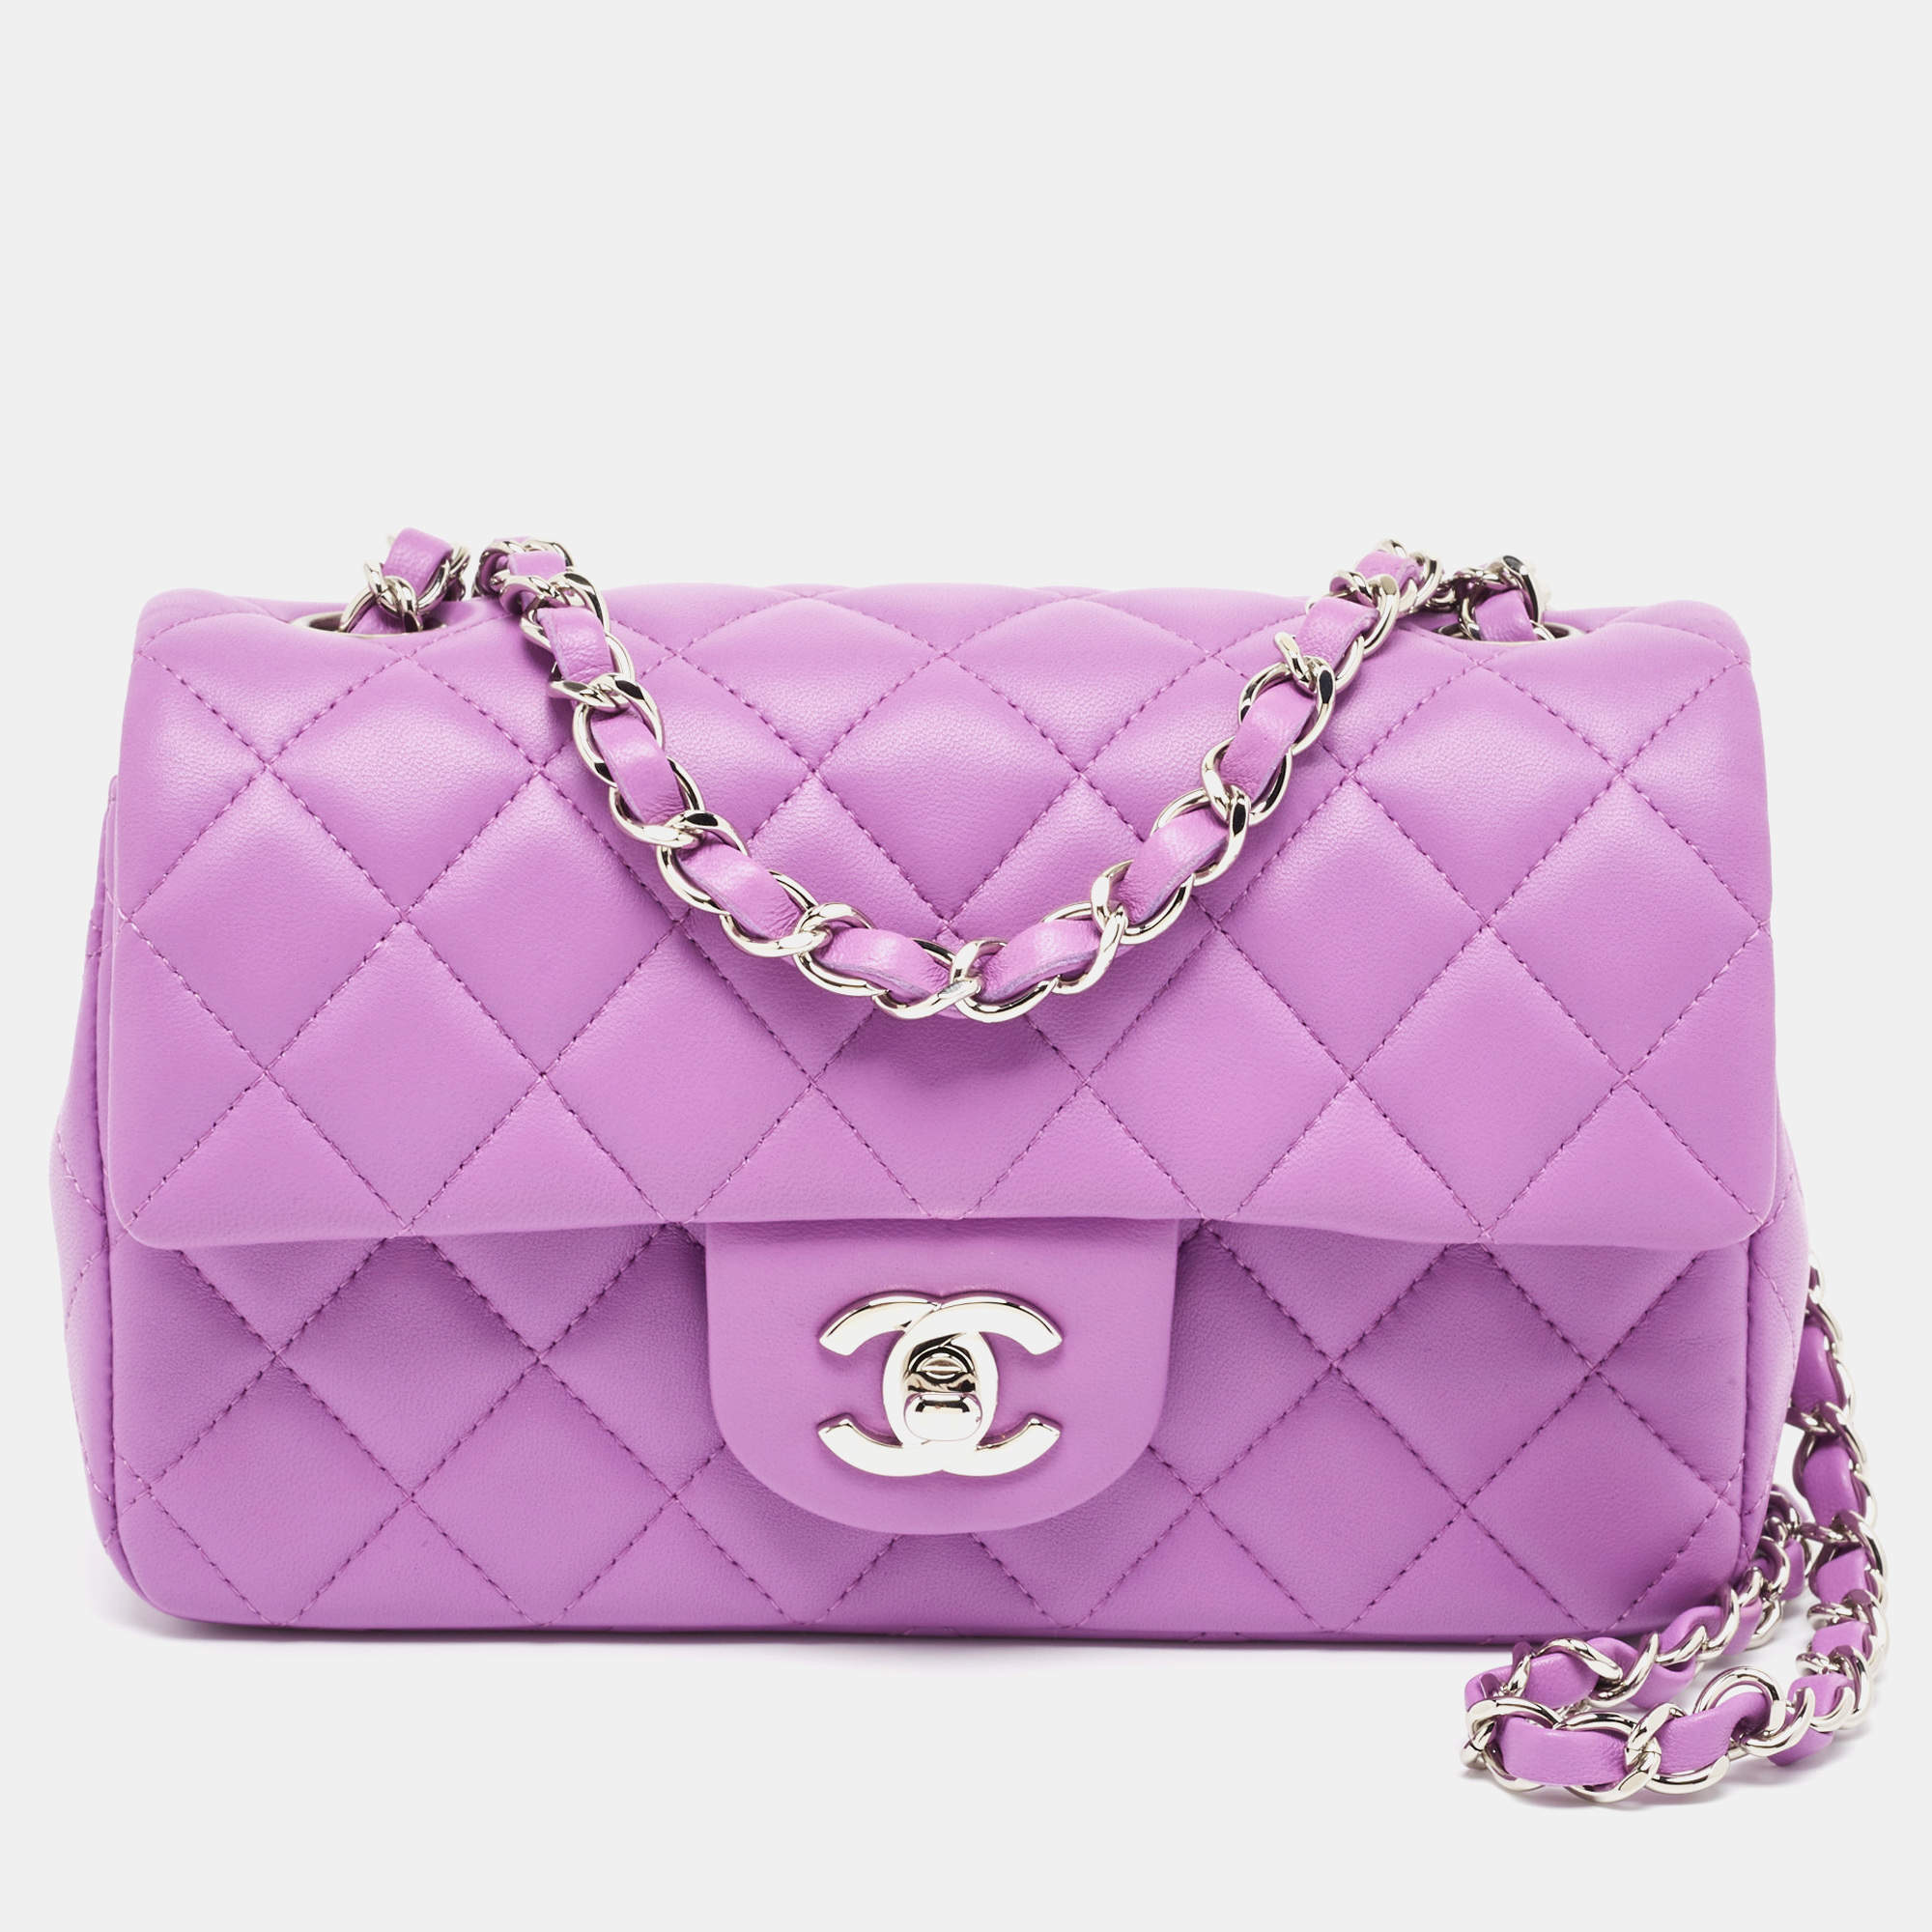 Brand New Authentic Chanel 2019 Pink Quilted and 50 similar items